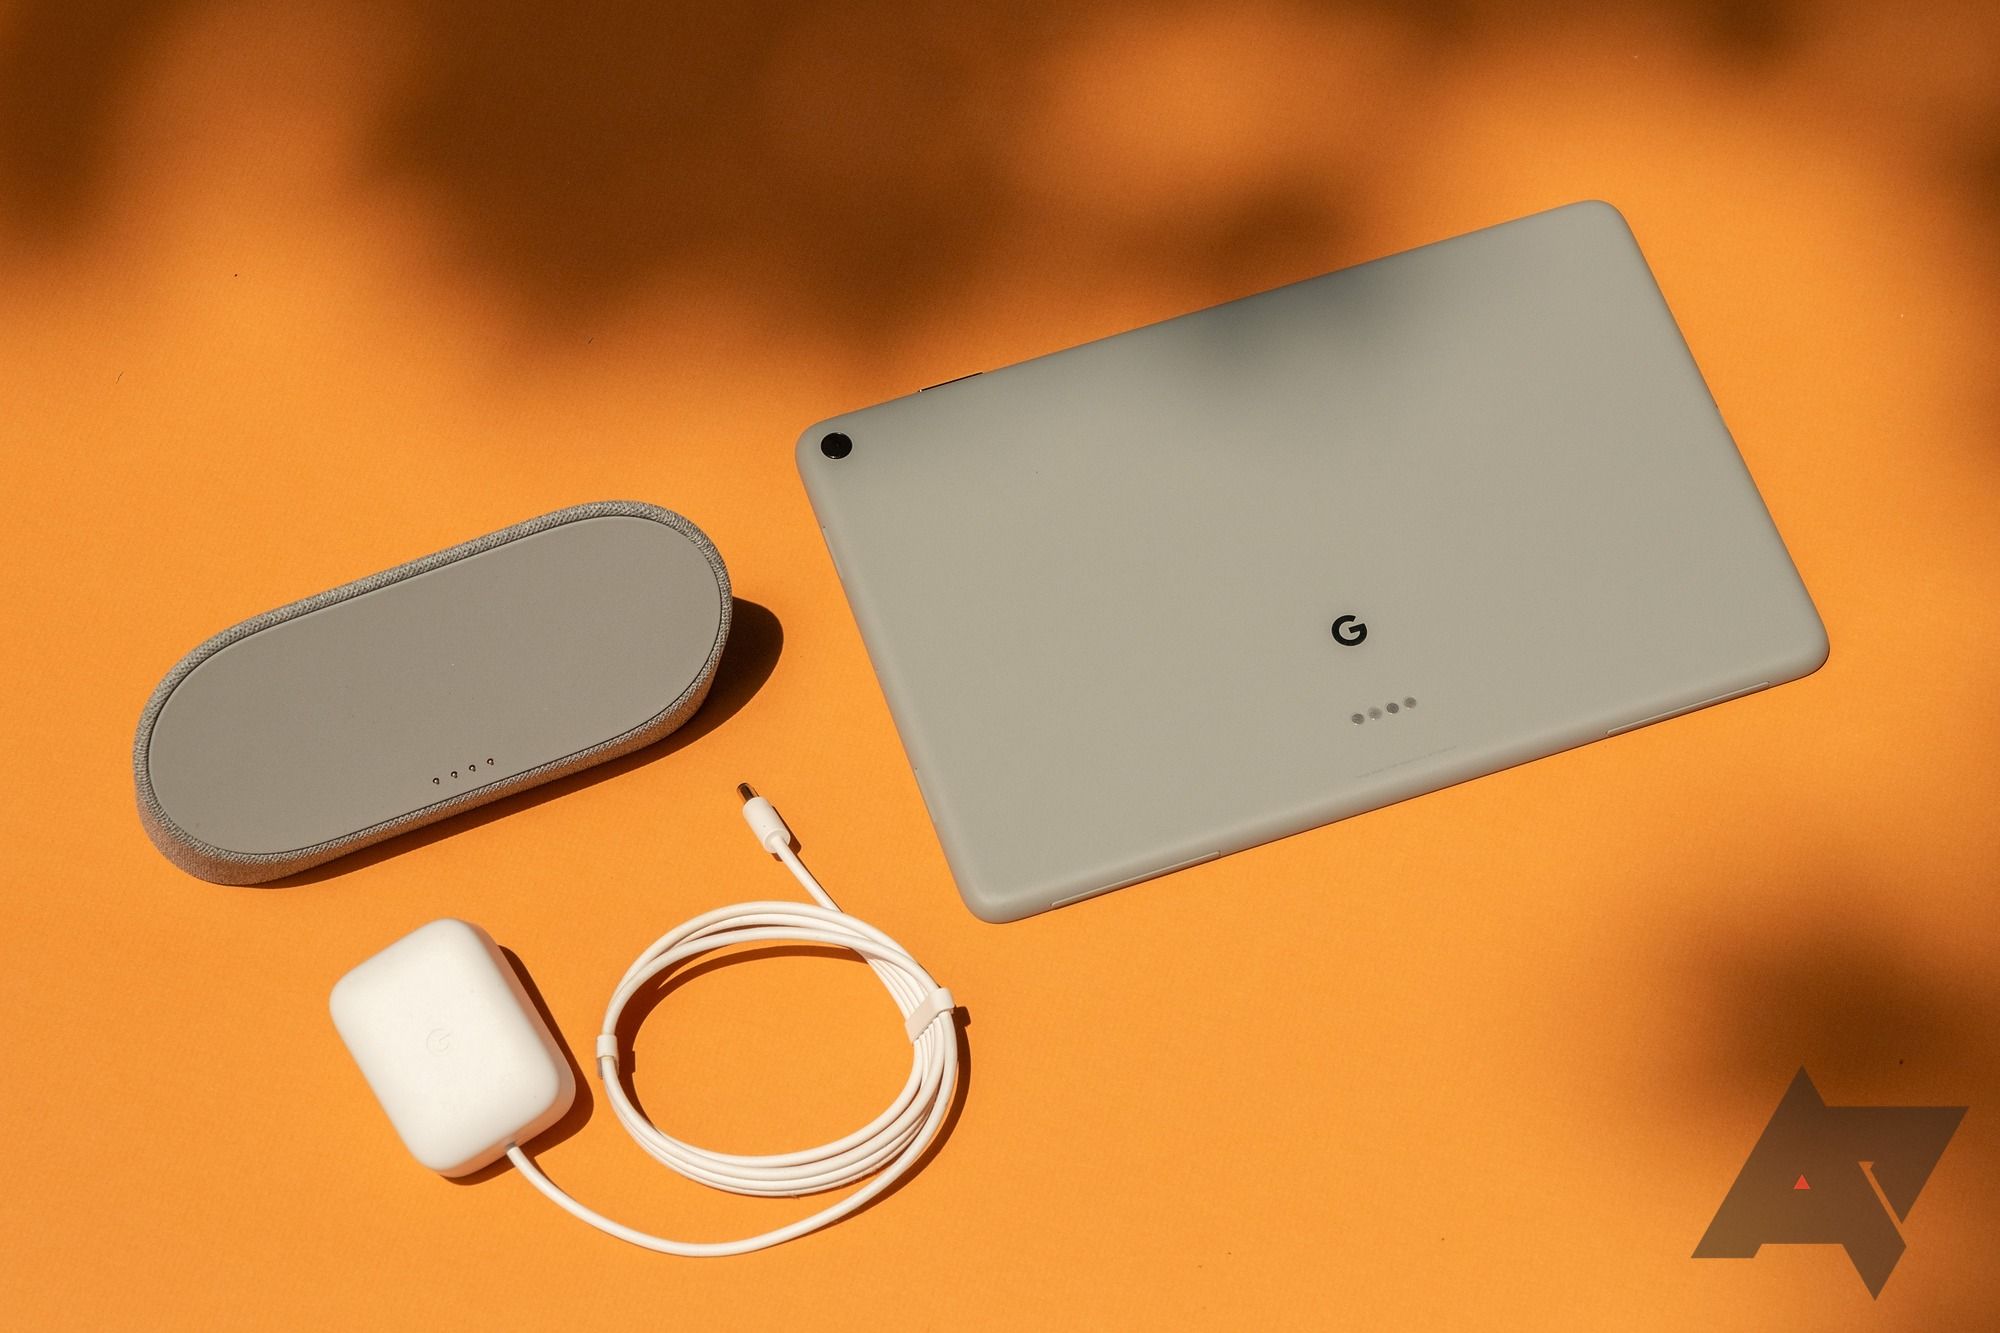 The Google Pixel Tablet, the stand, and the charging cable.